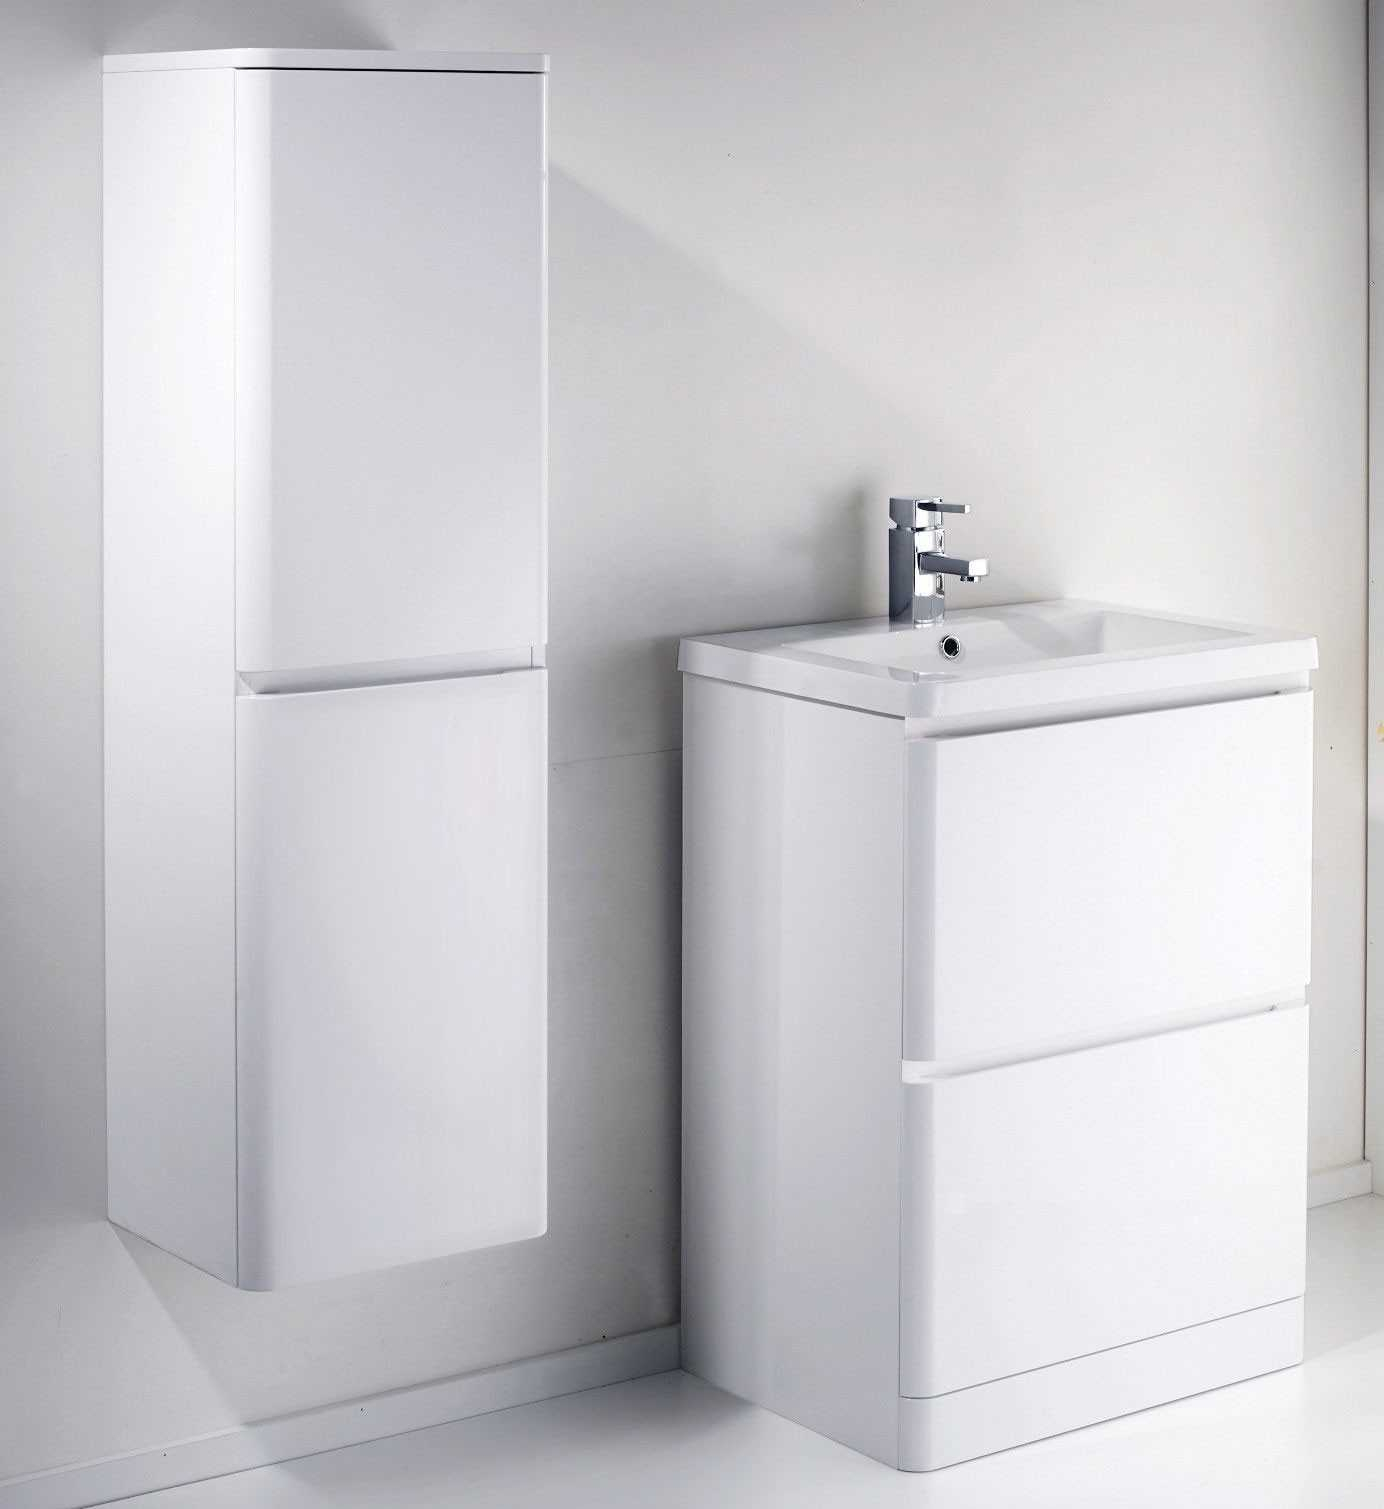 Bathrooms Cabinets Bathroom Trends With Fabulous Corner Cabinet throughout proportions 1384 X 1509